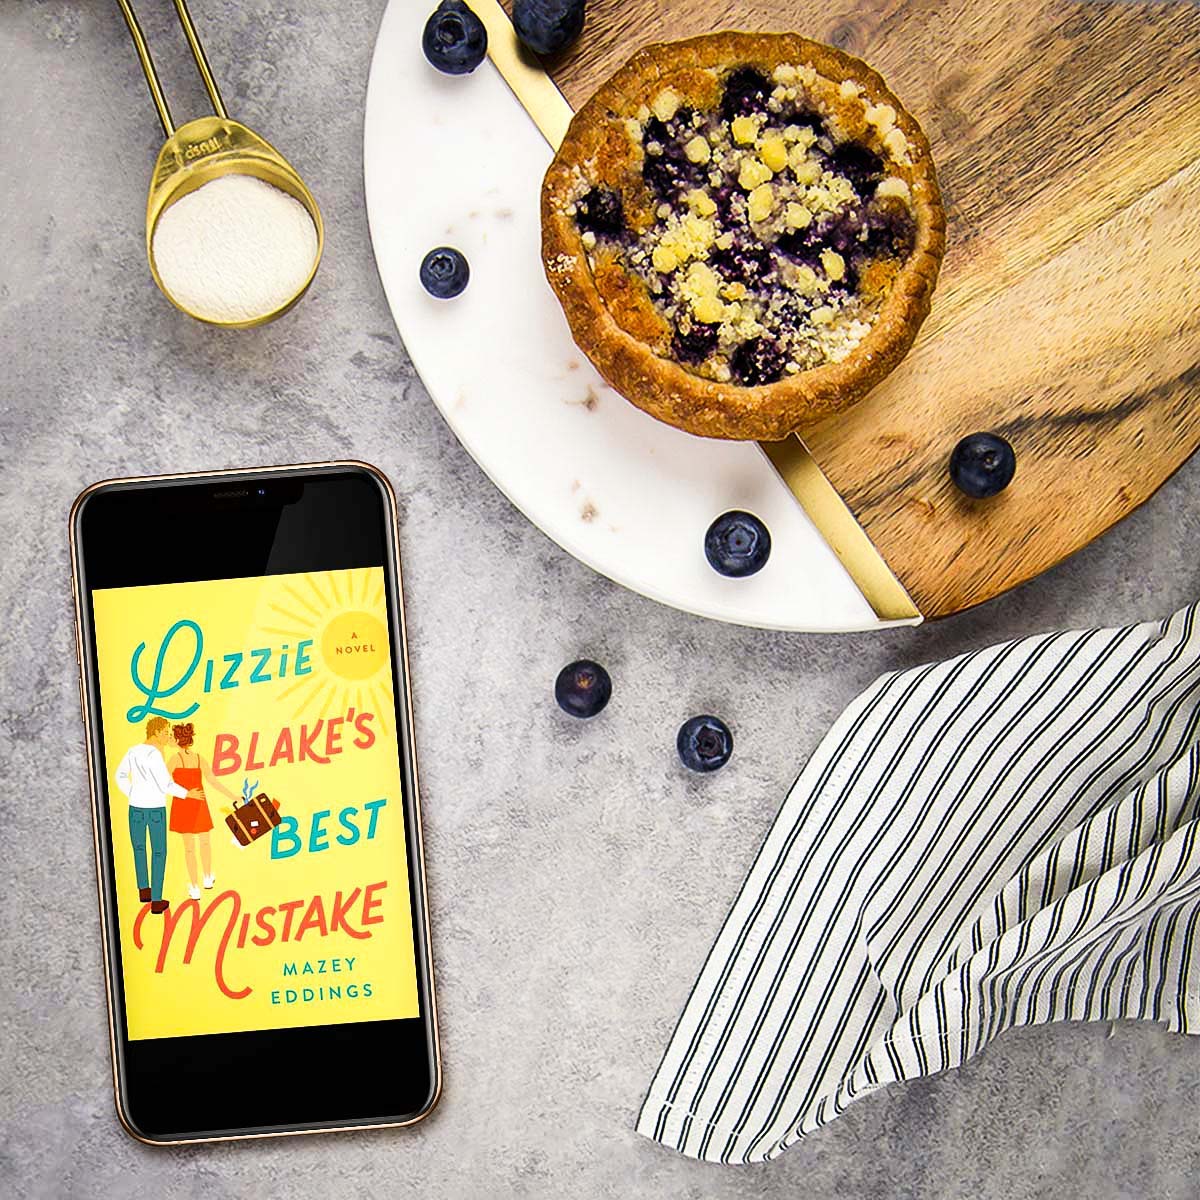 Filled with heartbreaking and hilarious scenes, an unexpected pregnancy brings together an Aussie businessman and an American with ADHD in Lizzie Blake's Best Mistake by Mazey Eddings